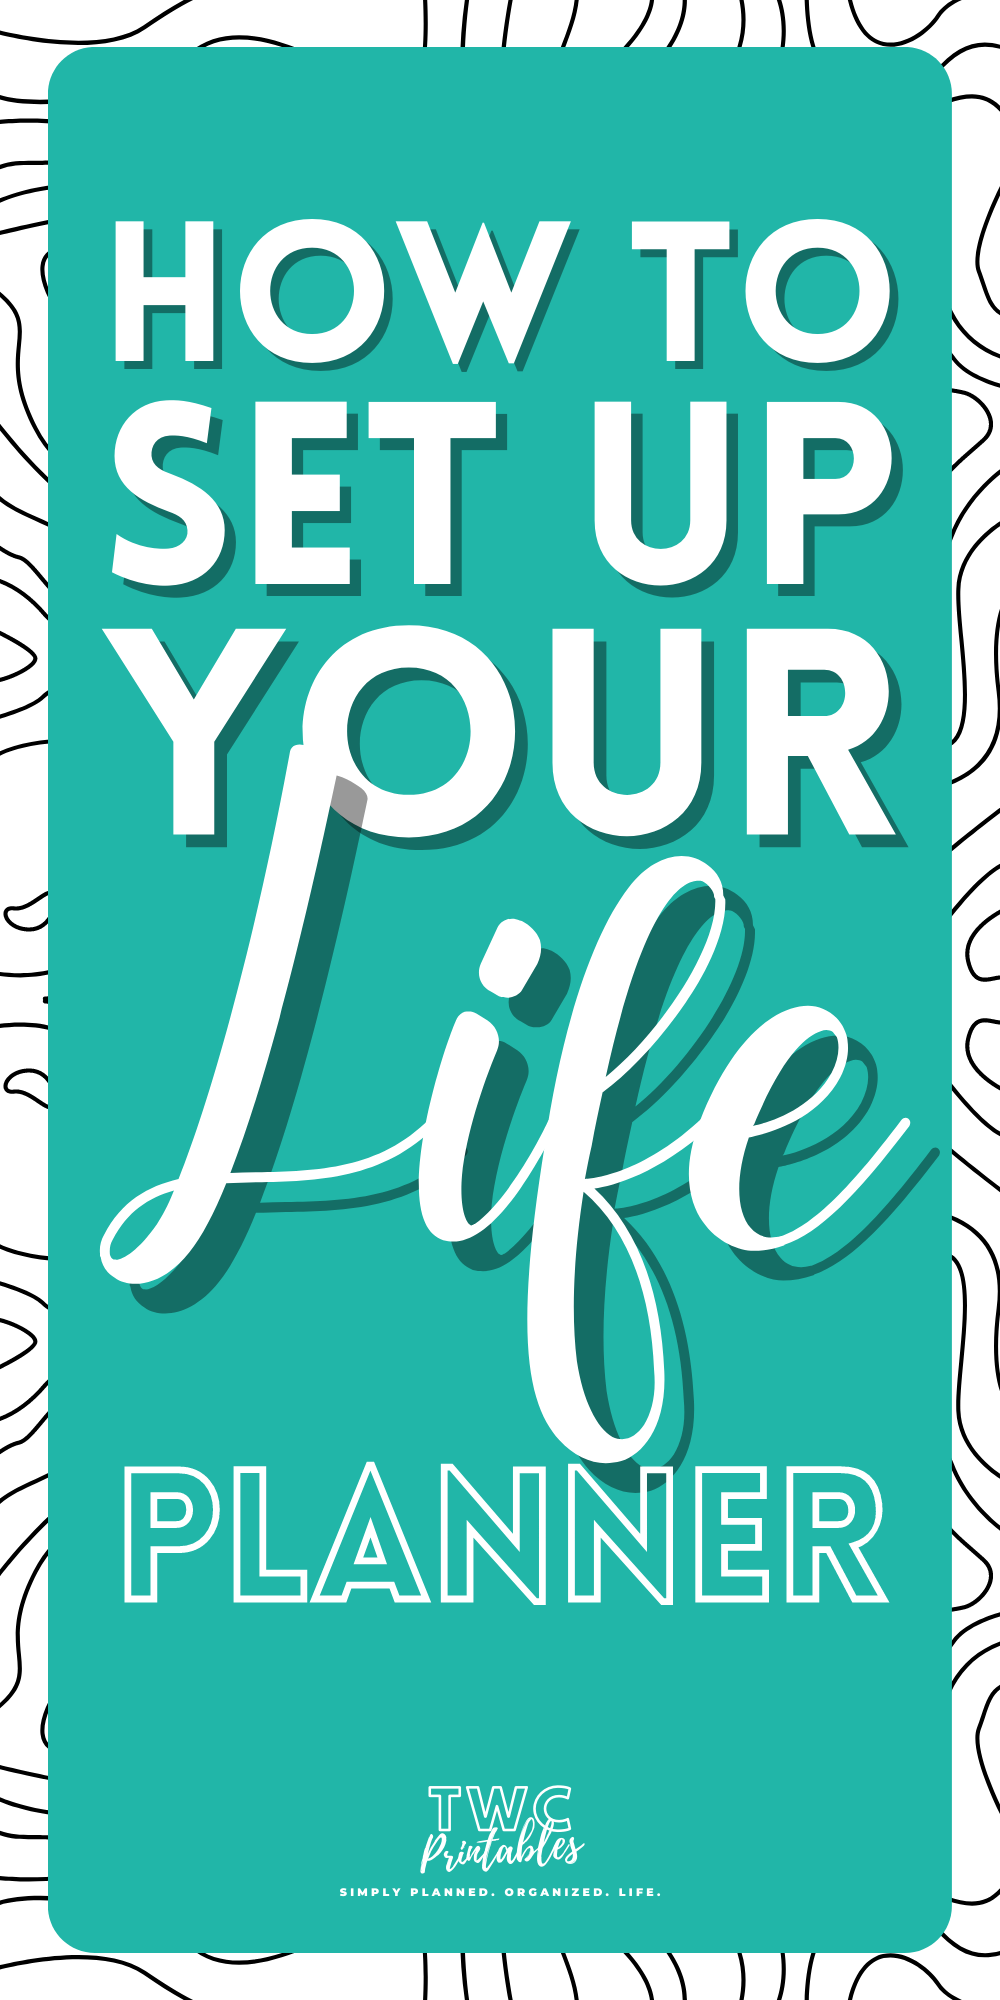 How to set up your life planner blog post